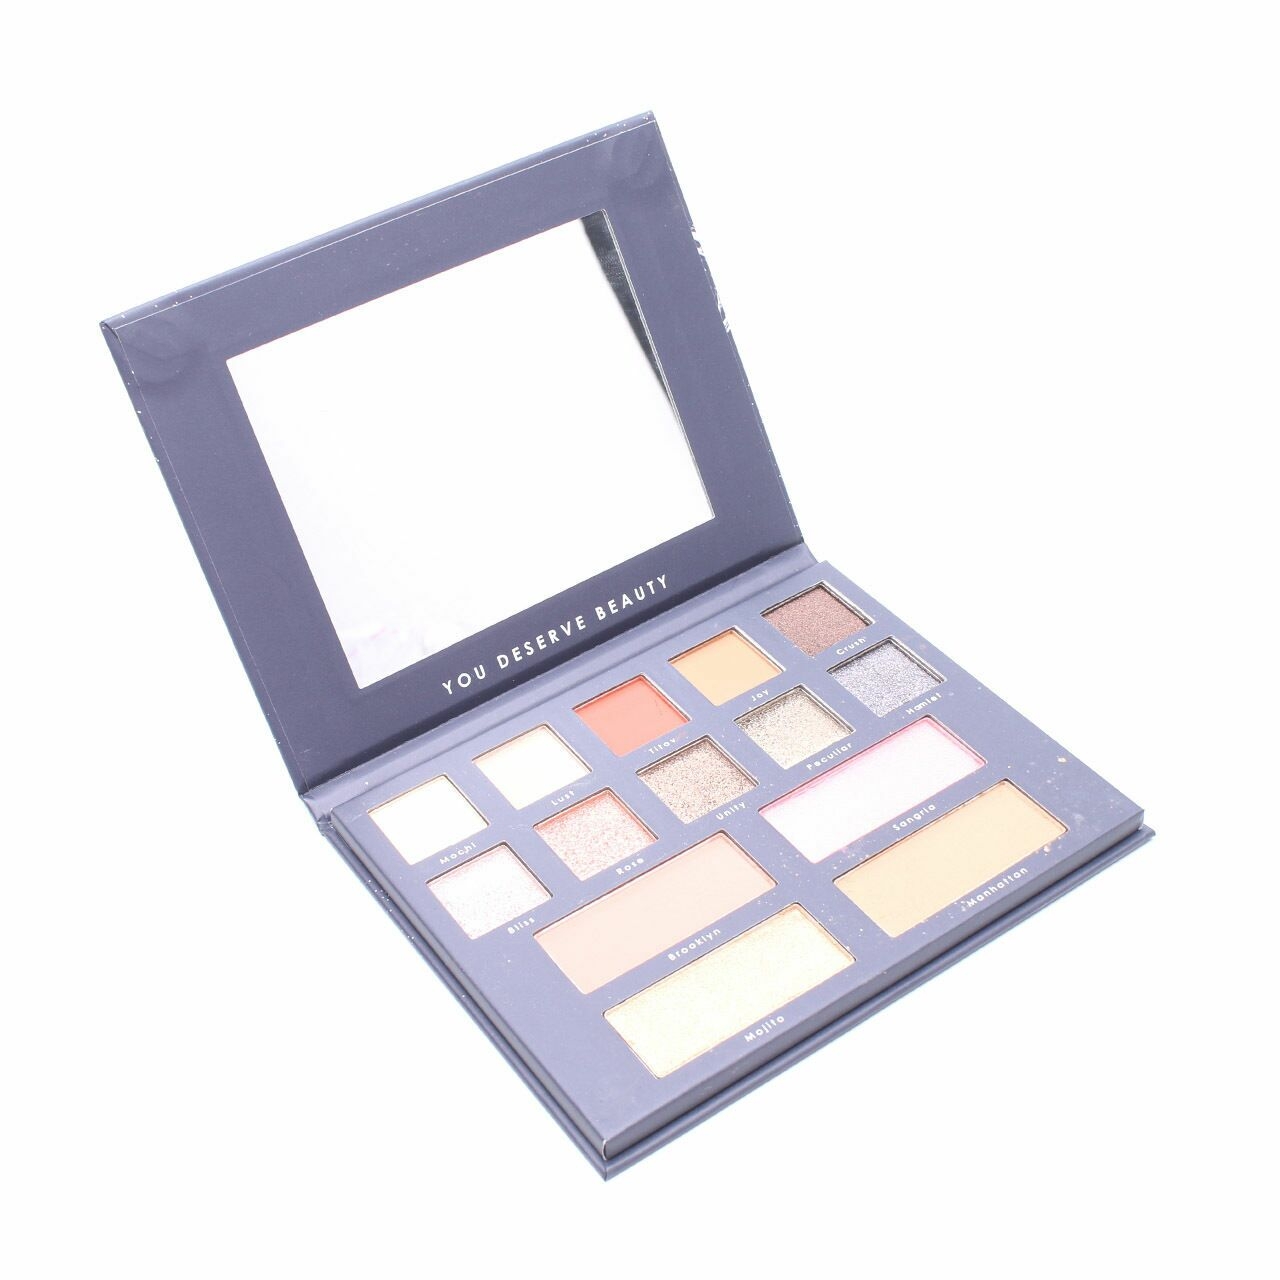 Jarte beauty X Patricia Stephanie 2In1 Face And Eyes Palette Sets and Palette